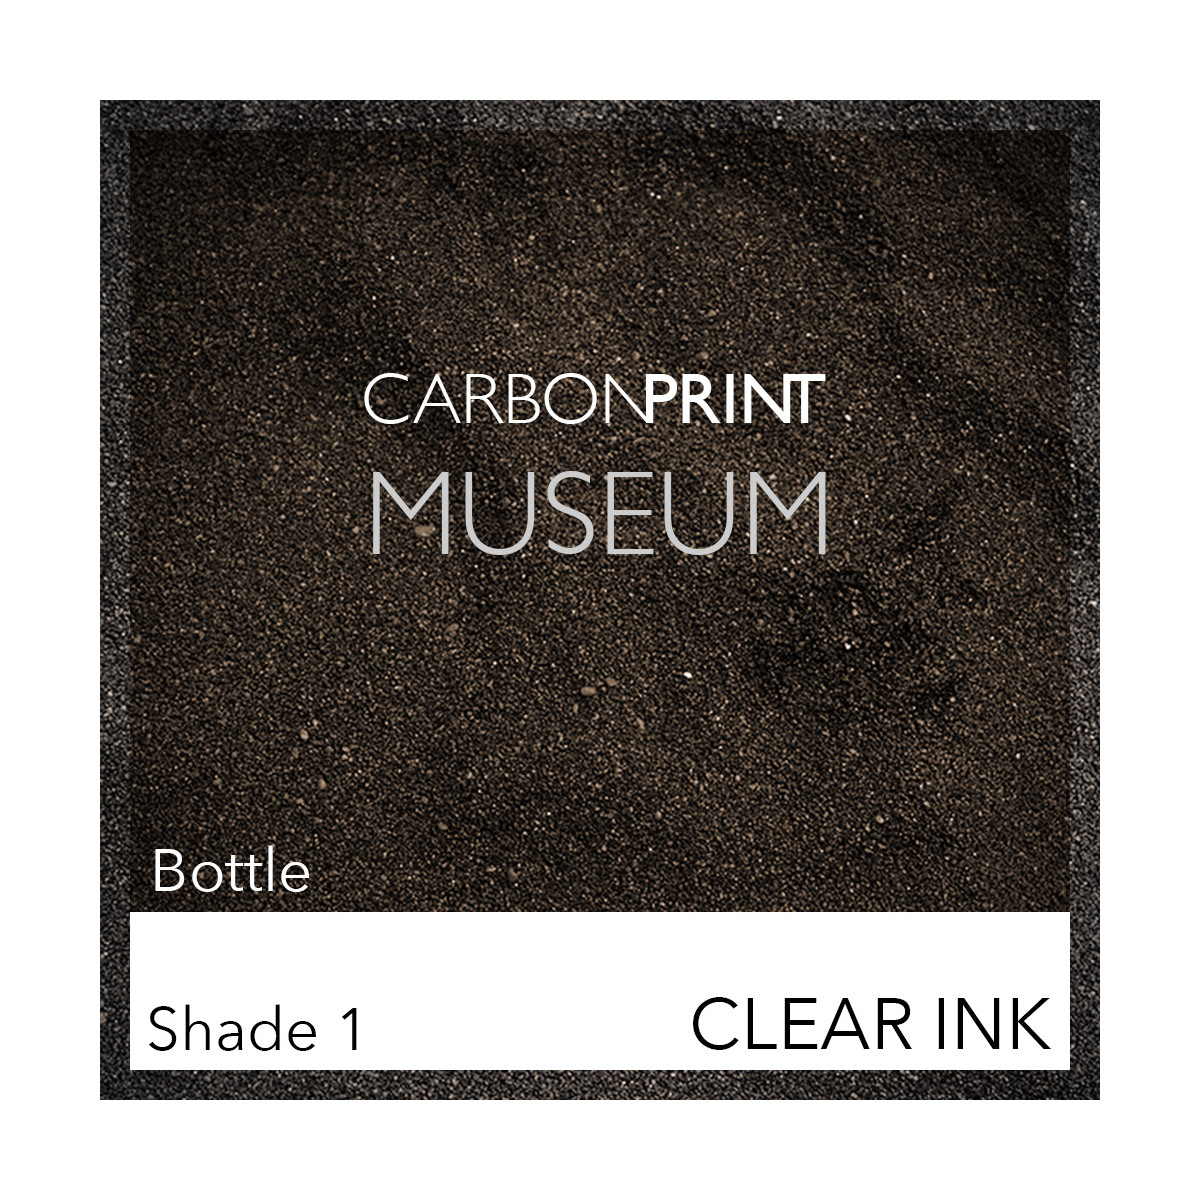 Carbonprint Museum Shade1 Channel PK